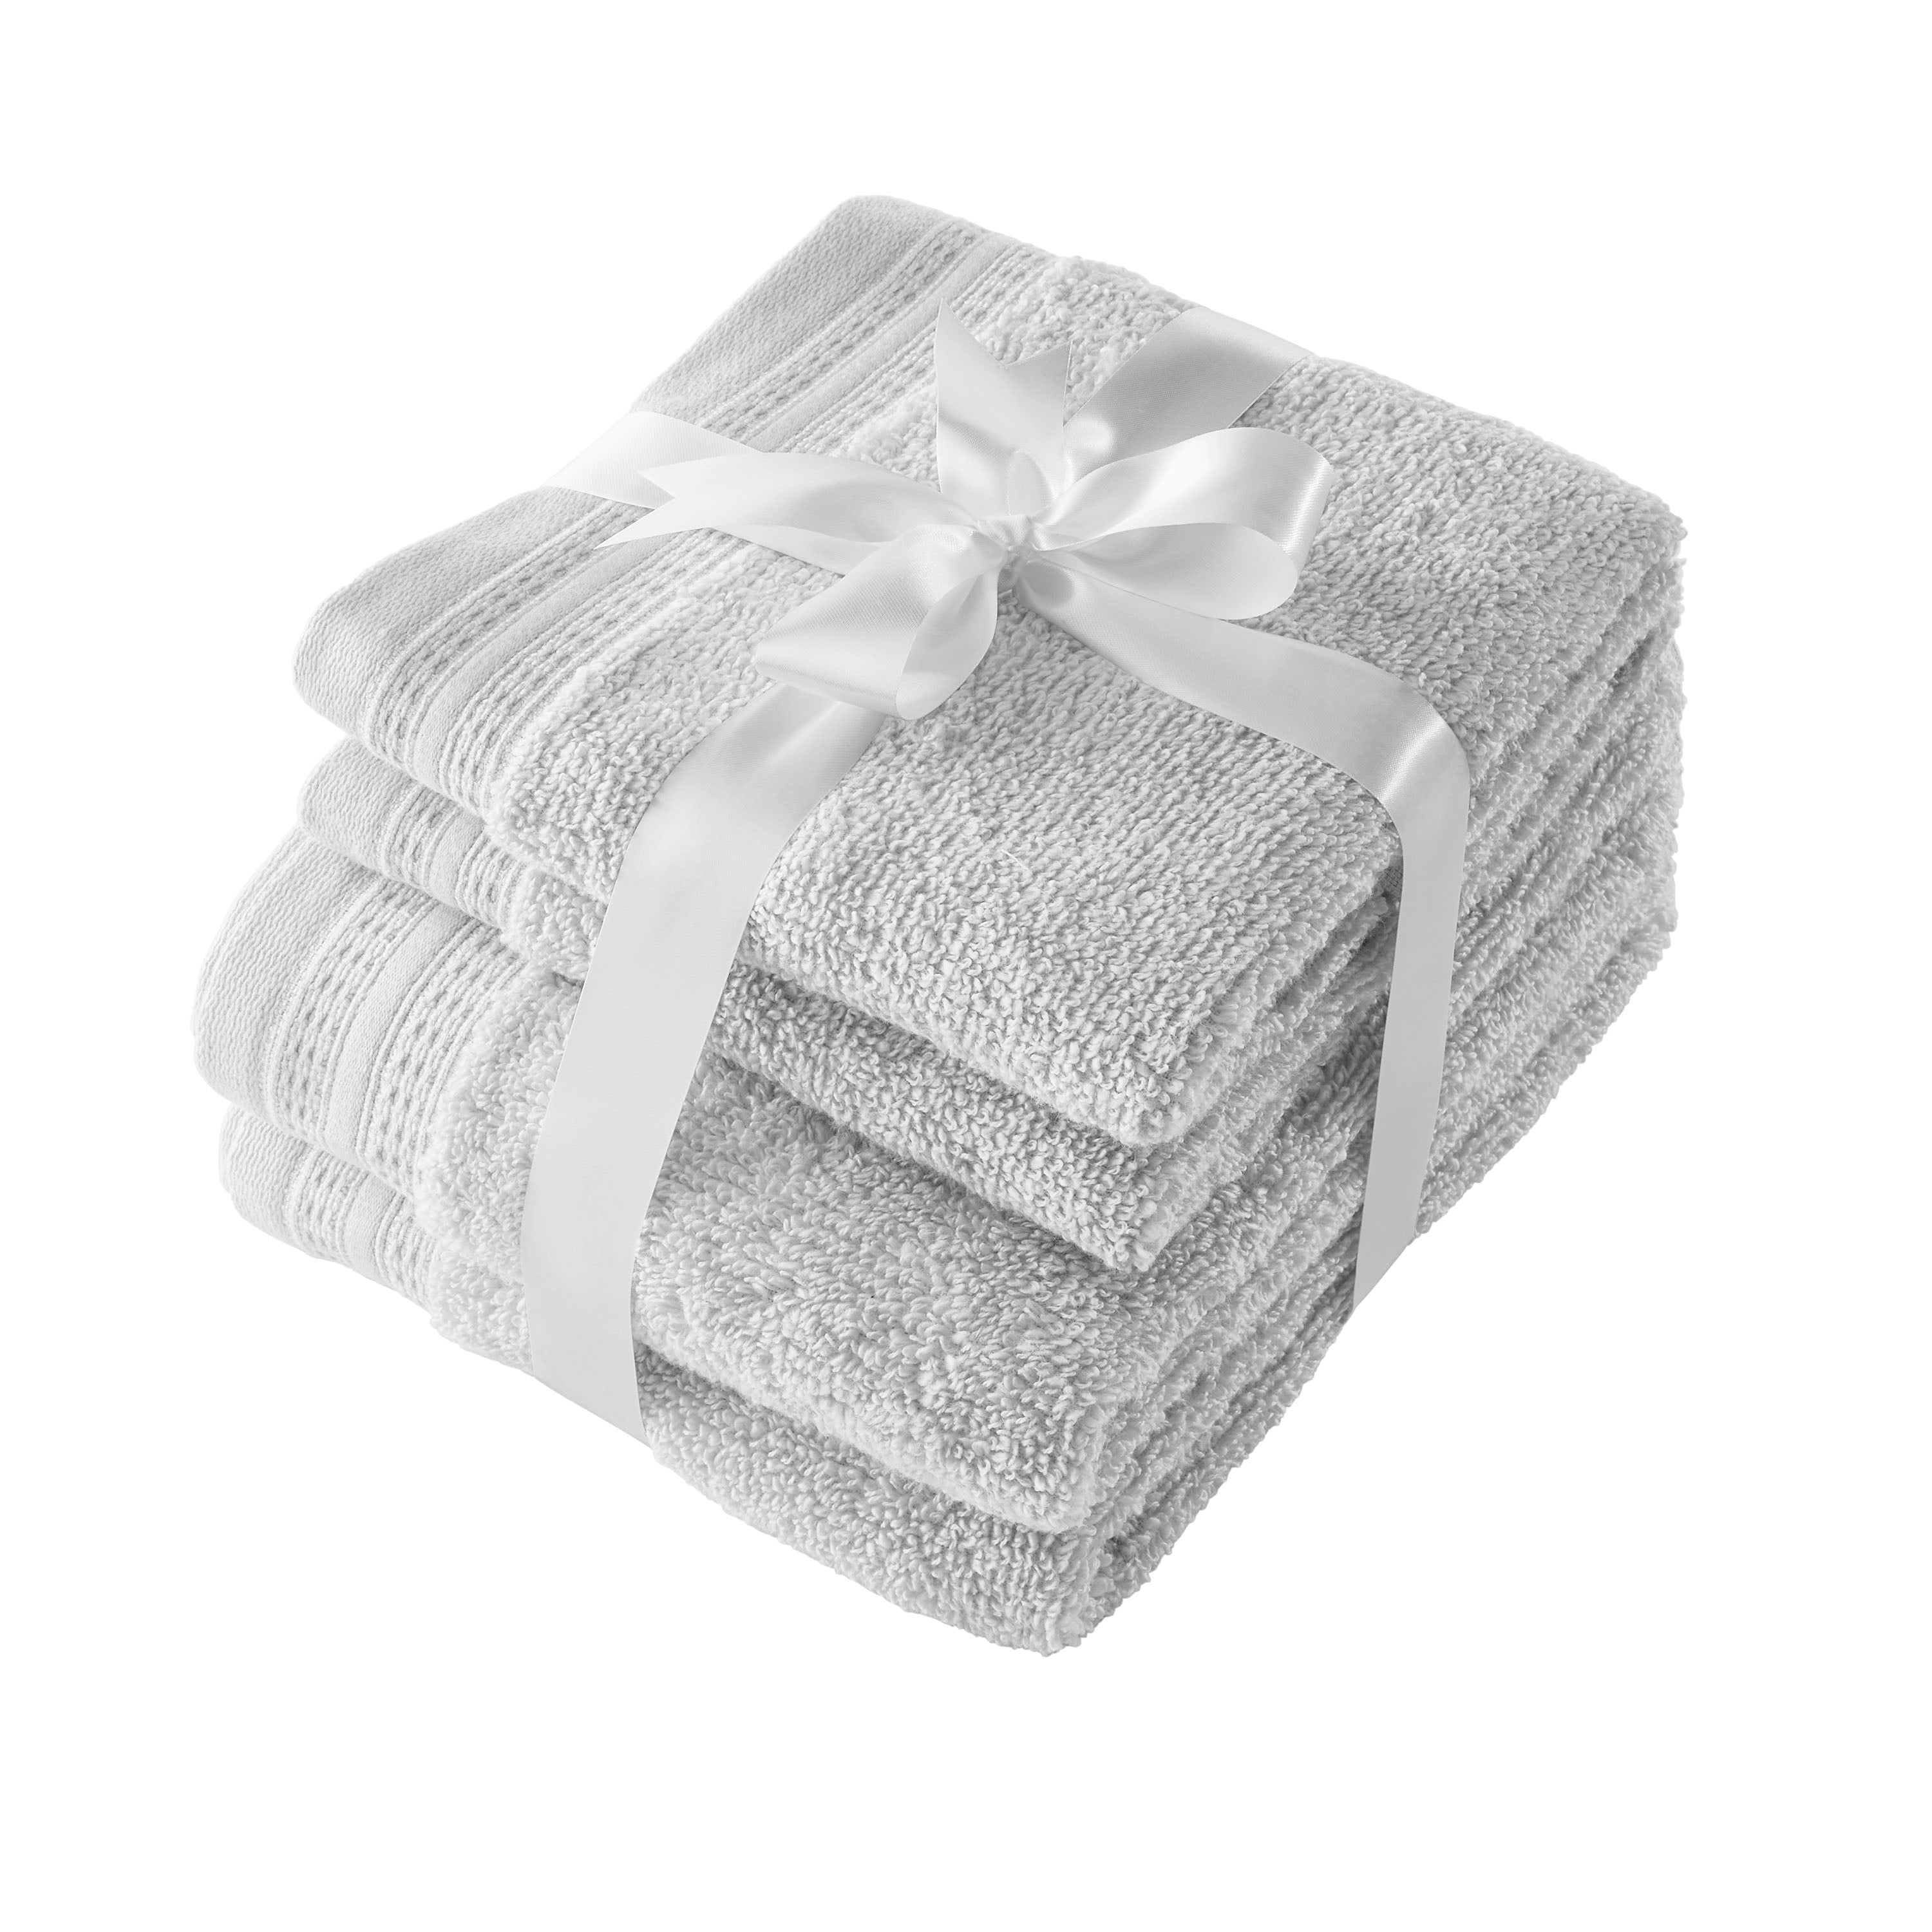 Online Shopping for Housewares, Baby Gear, Health & more. 900GSM Egyptian  Cotton 4-Piece Hand Towel Set Latte